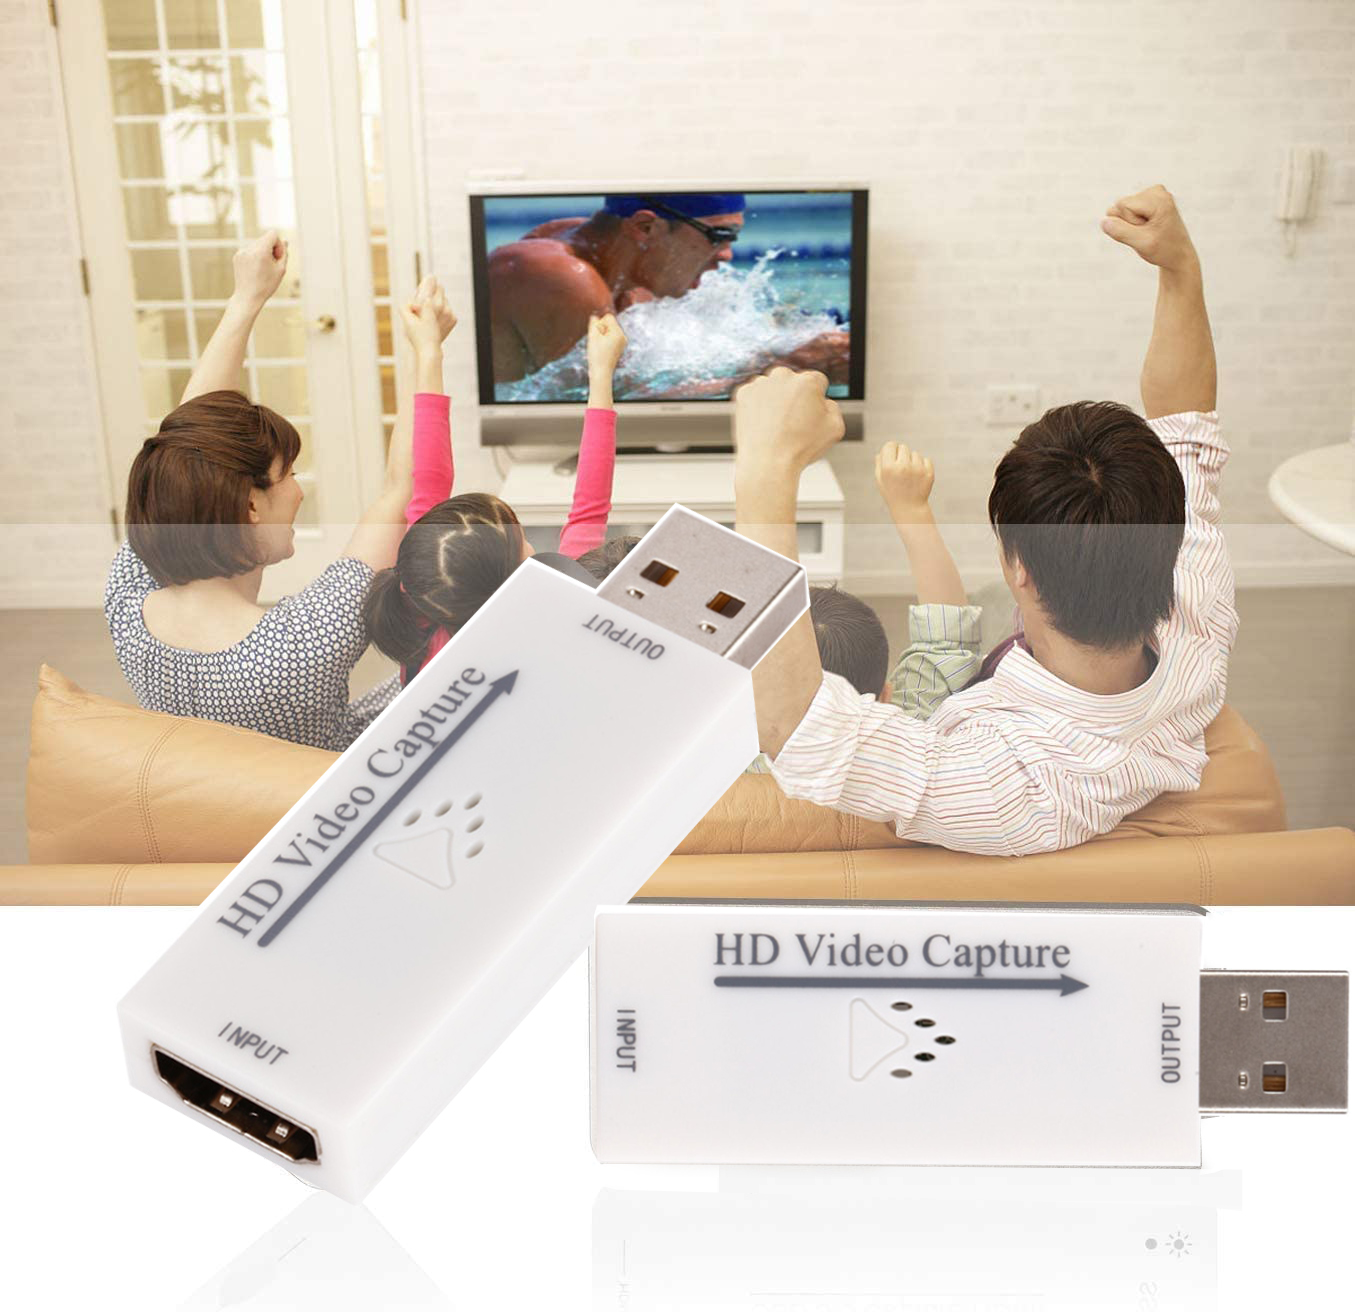 USB 2.0 Mini HD 1080P HDMI Video Capture Card Live Recording Box Supports OBS for PC Game/Video/Live Broadcast BGD0090